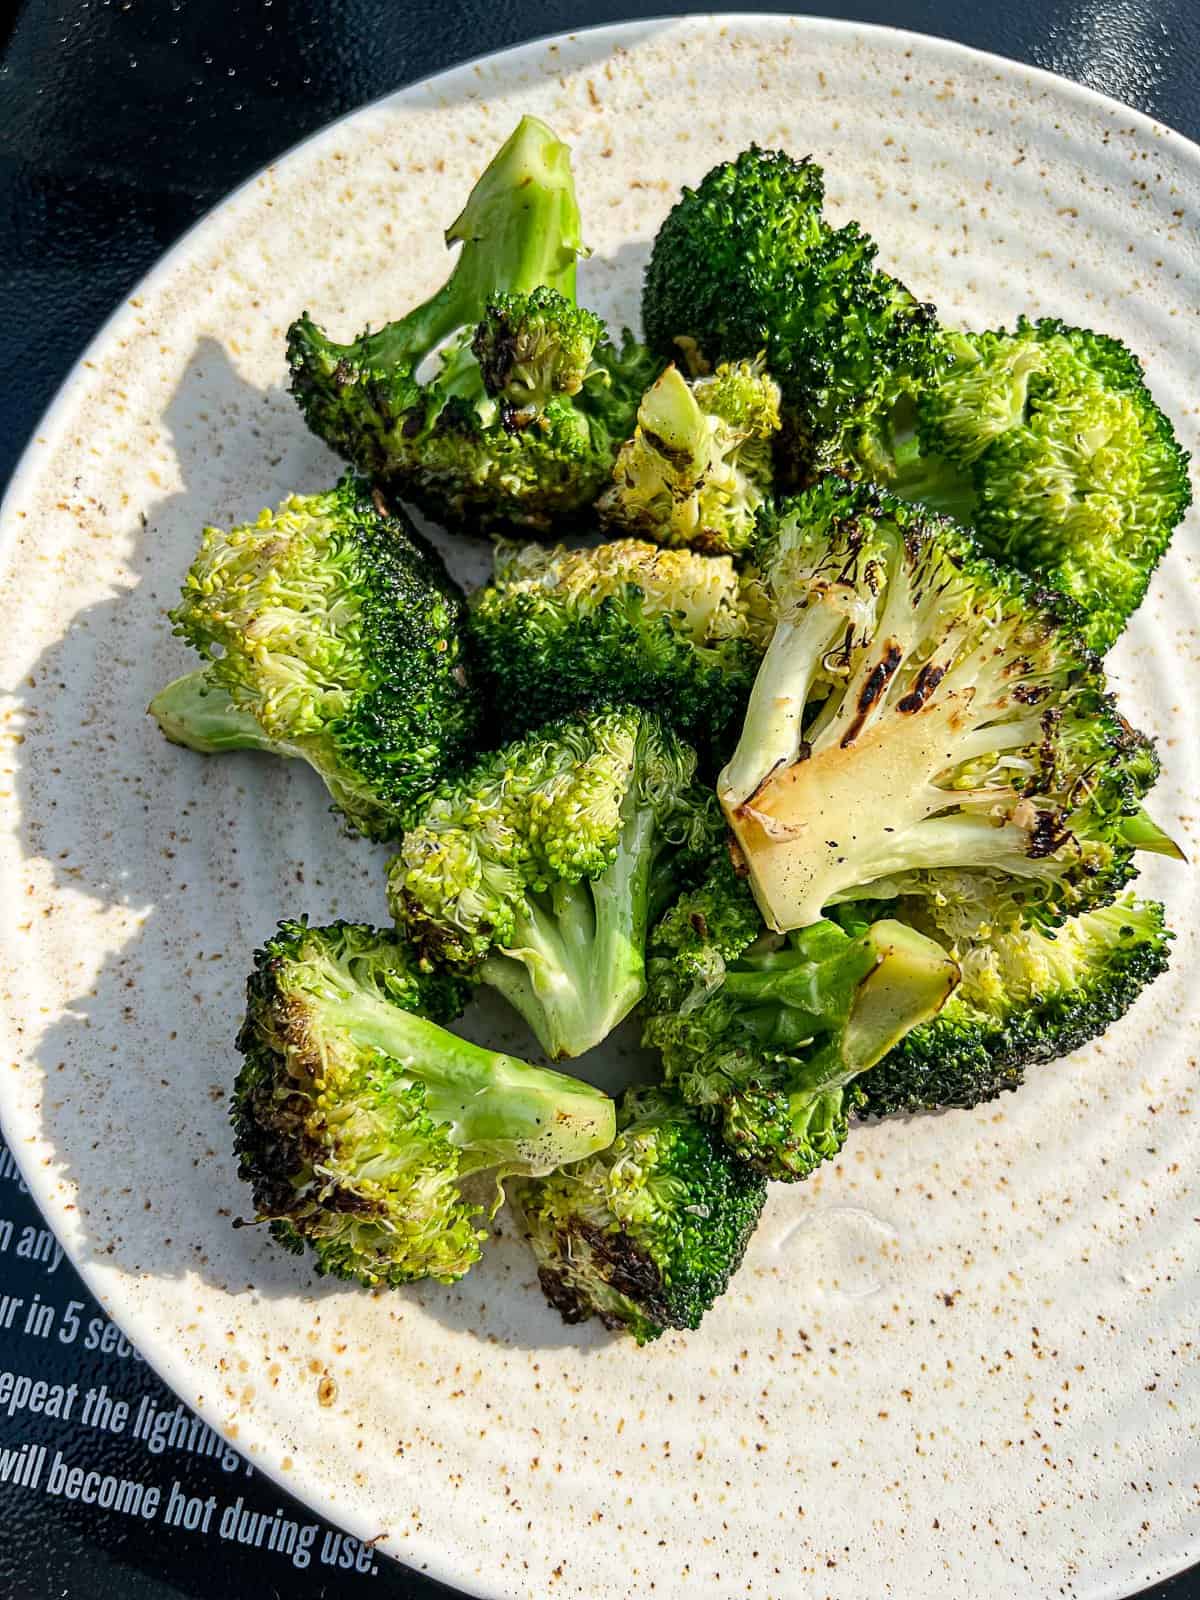 Side Dish with Griddle Cooked Broccoli